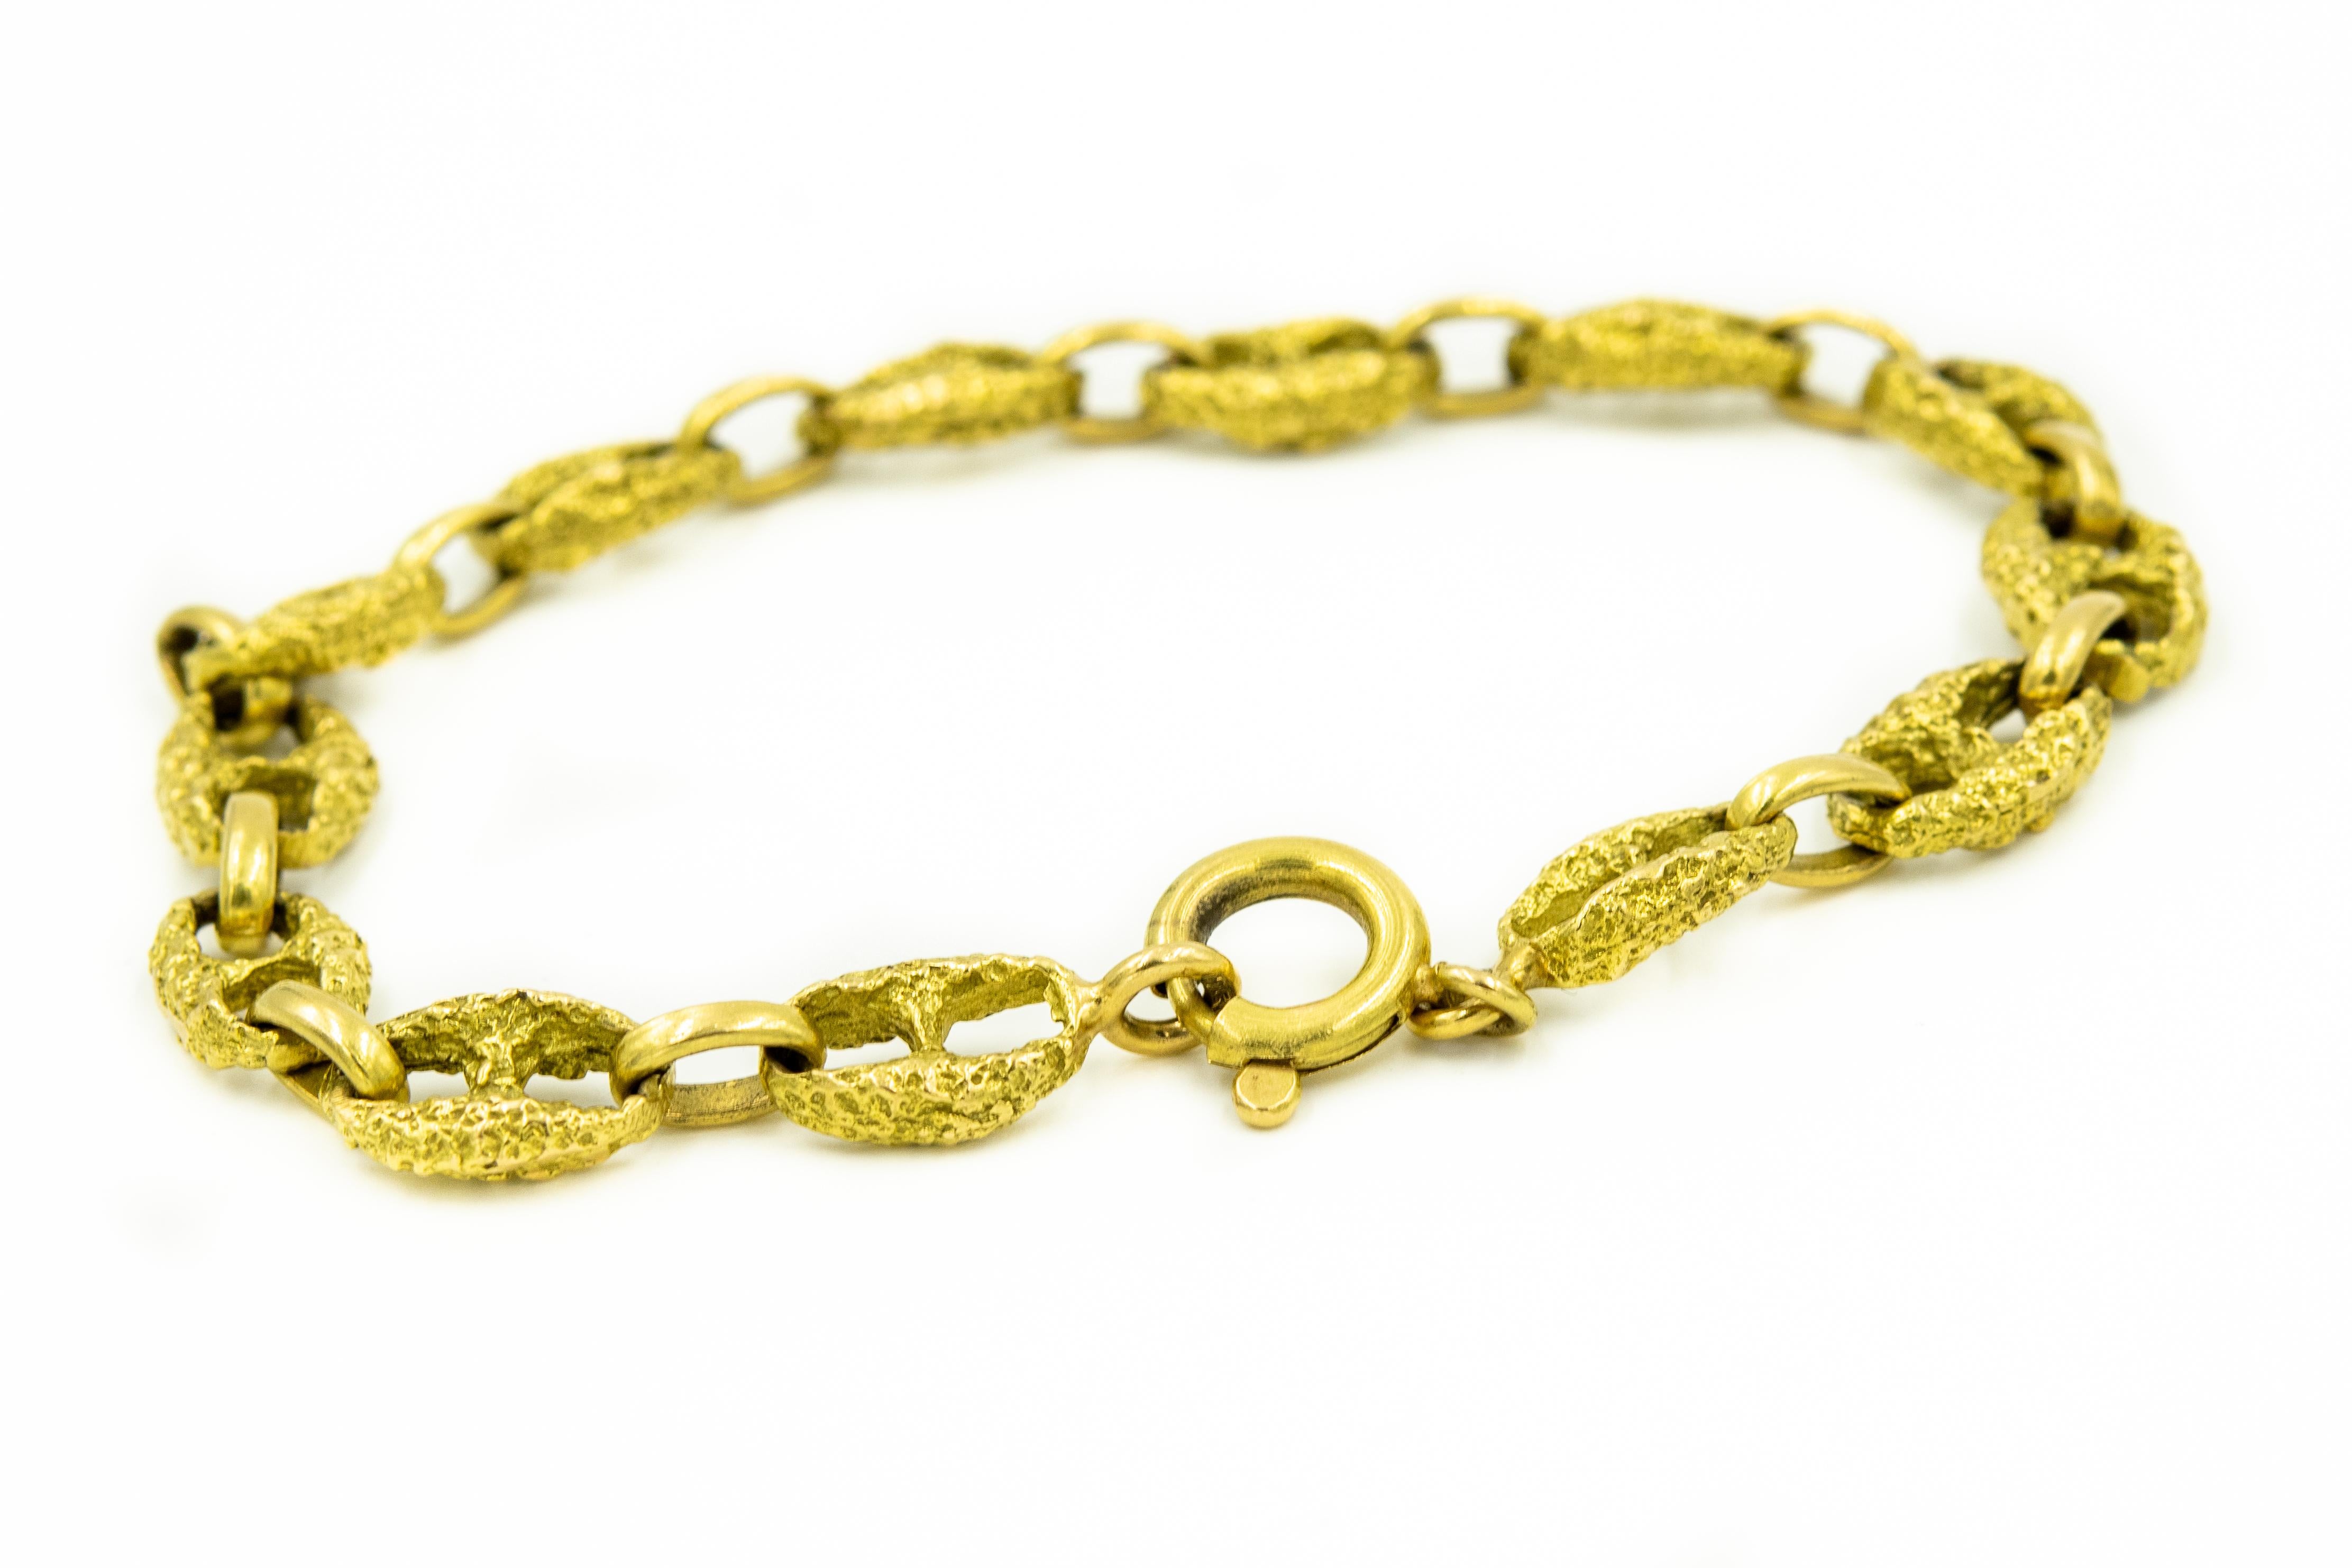 Italian 1960s Gucci style 18k yellow gold mariner anchor link bracelet featuring a bark finish on the anchor links and a shiny finish on the connecting links.  The width not including the clasp is .30